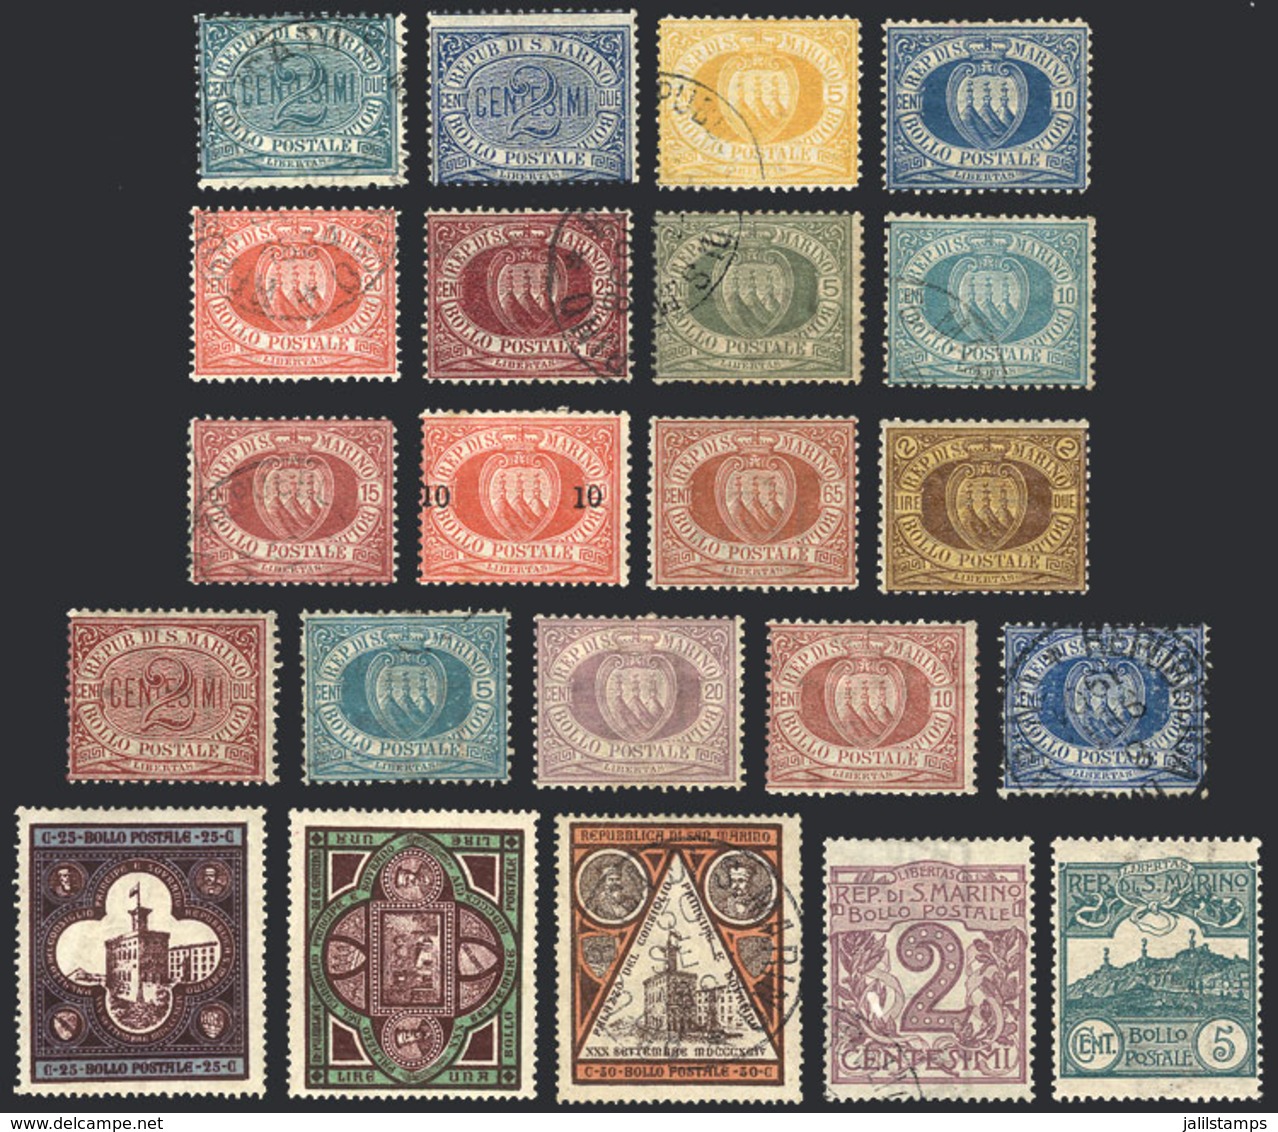 SAN MARINO: Lot Of Old Stamps, Used Or Mint, Fine To Very Fine General Quality, Scott Catalog Value US$1,200+ - Collections, Lots & Series